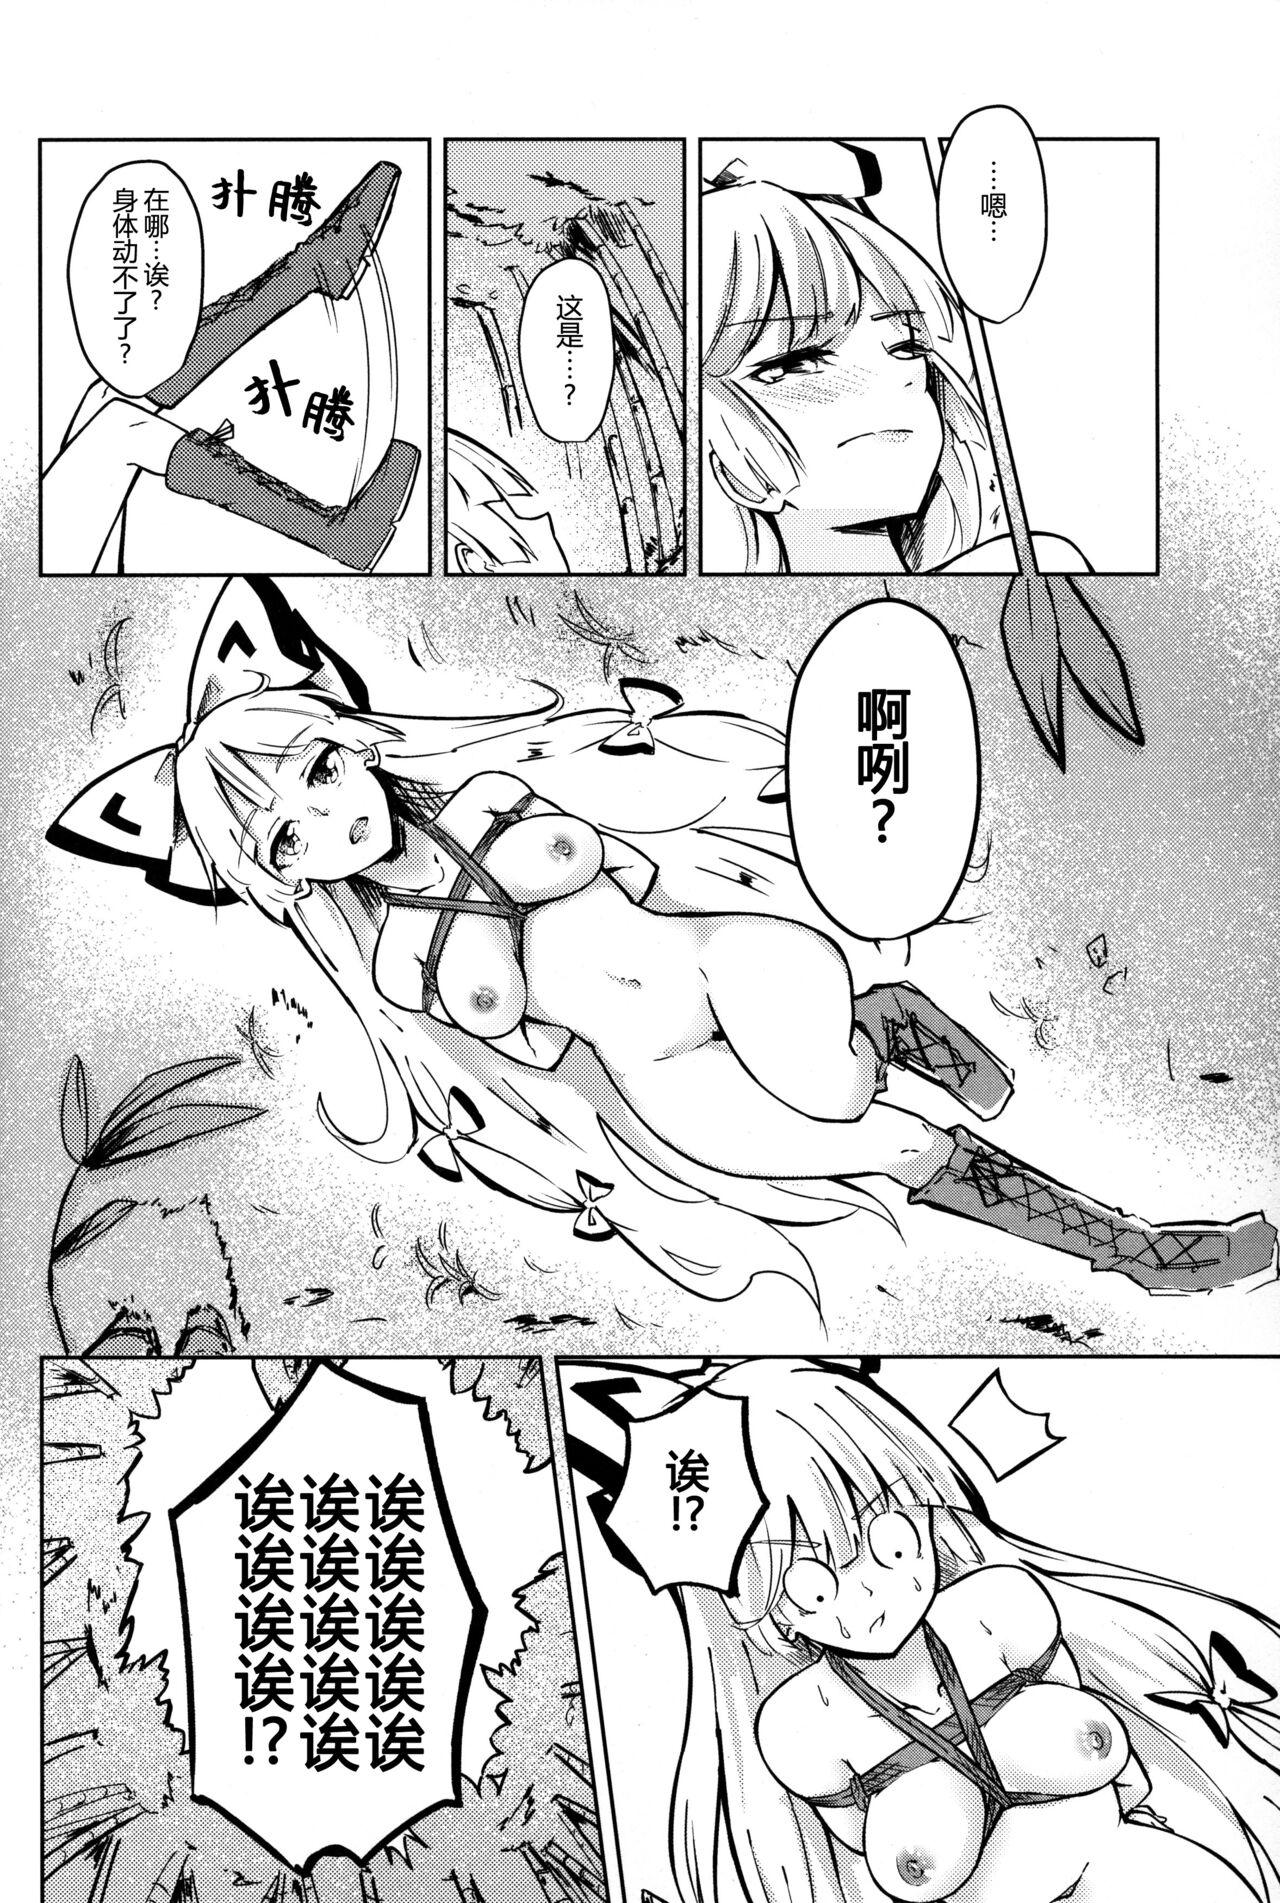 Hot Couple Sex Chikurin Running | 竹林 Running - Touhou project Oral Porn - Page 5